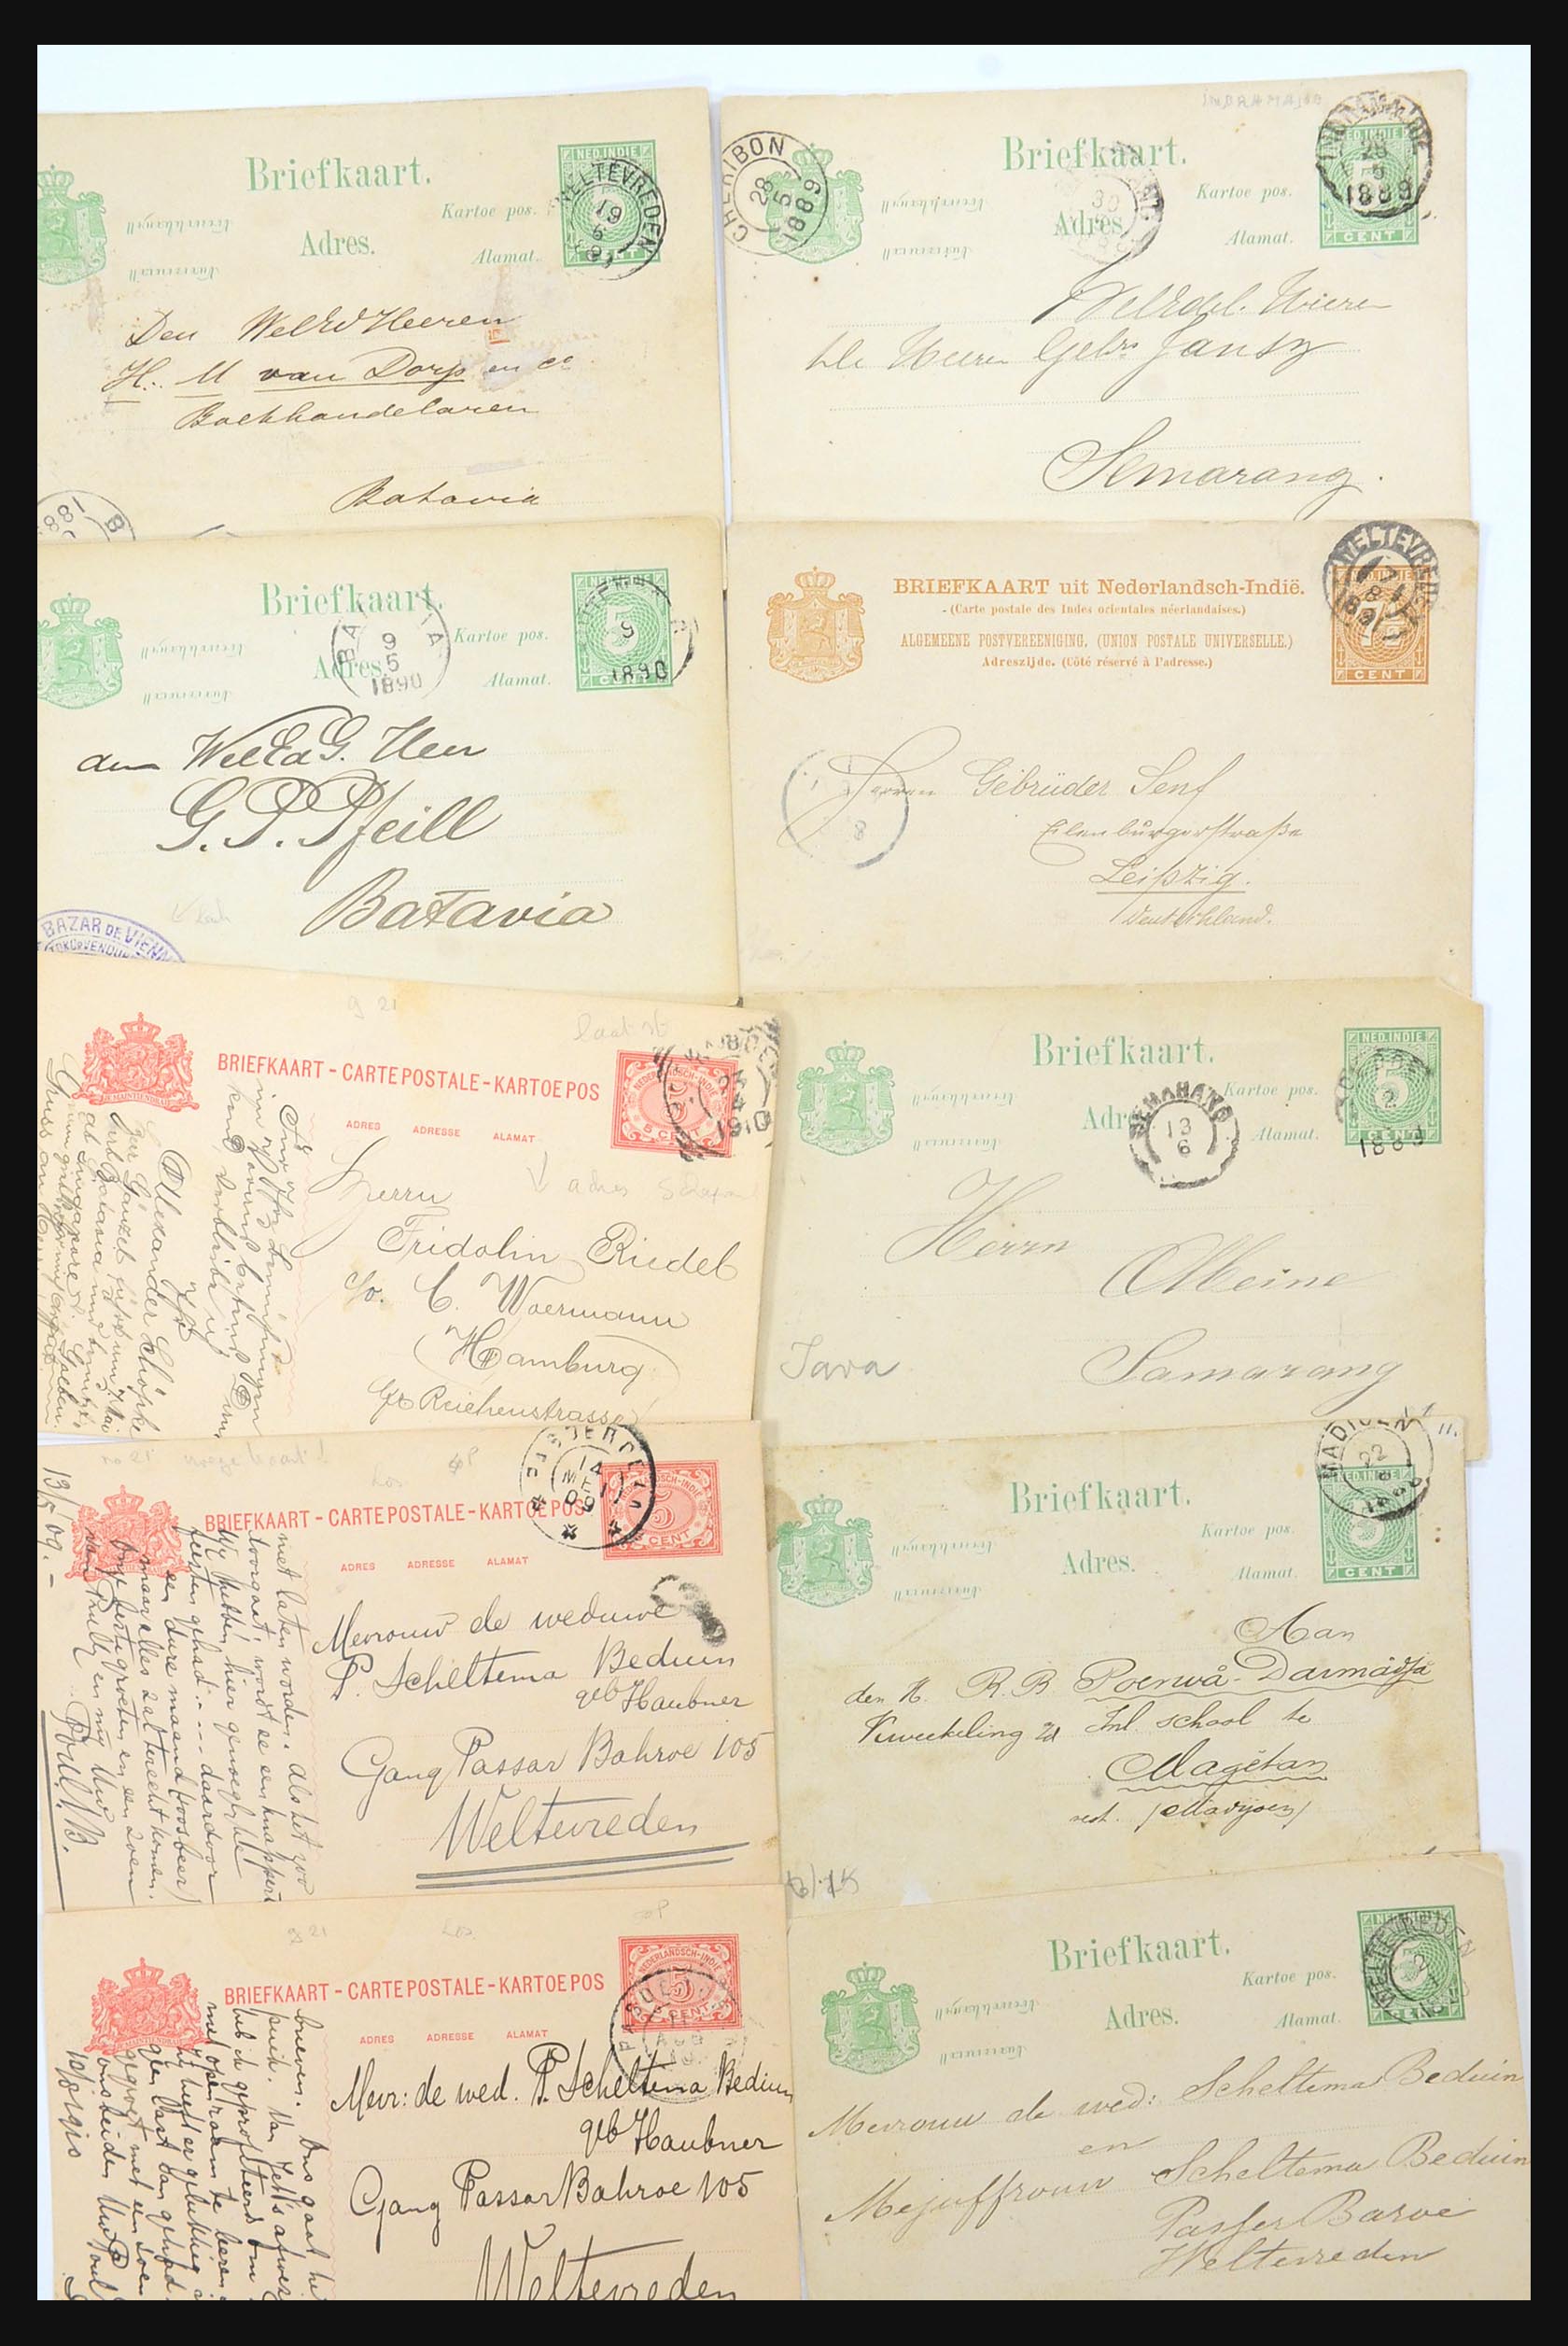 31361 014 - 31361 Netherlands Indies covers 1880-1950.